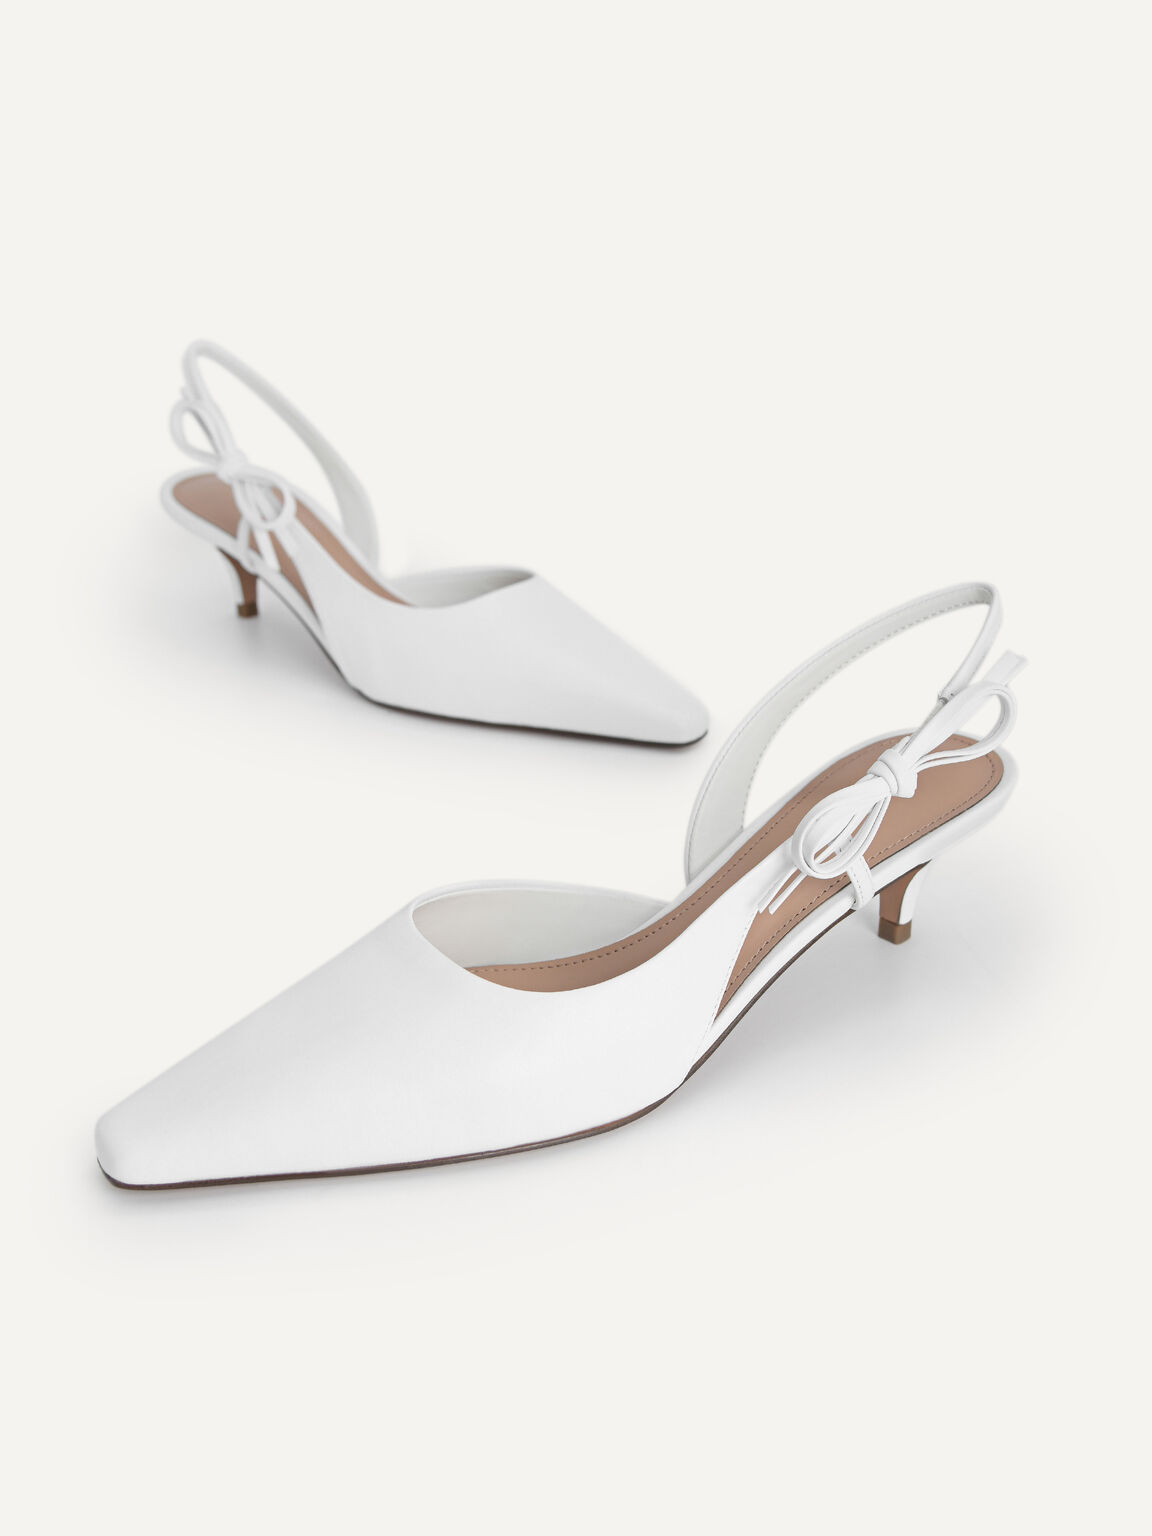 Bow-Detailed Leather Slingback Heels, White